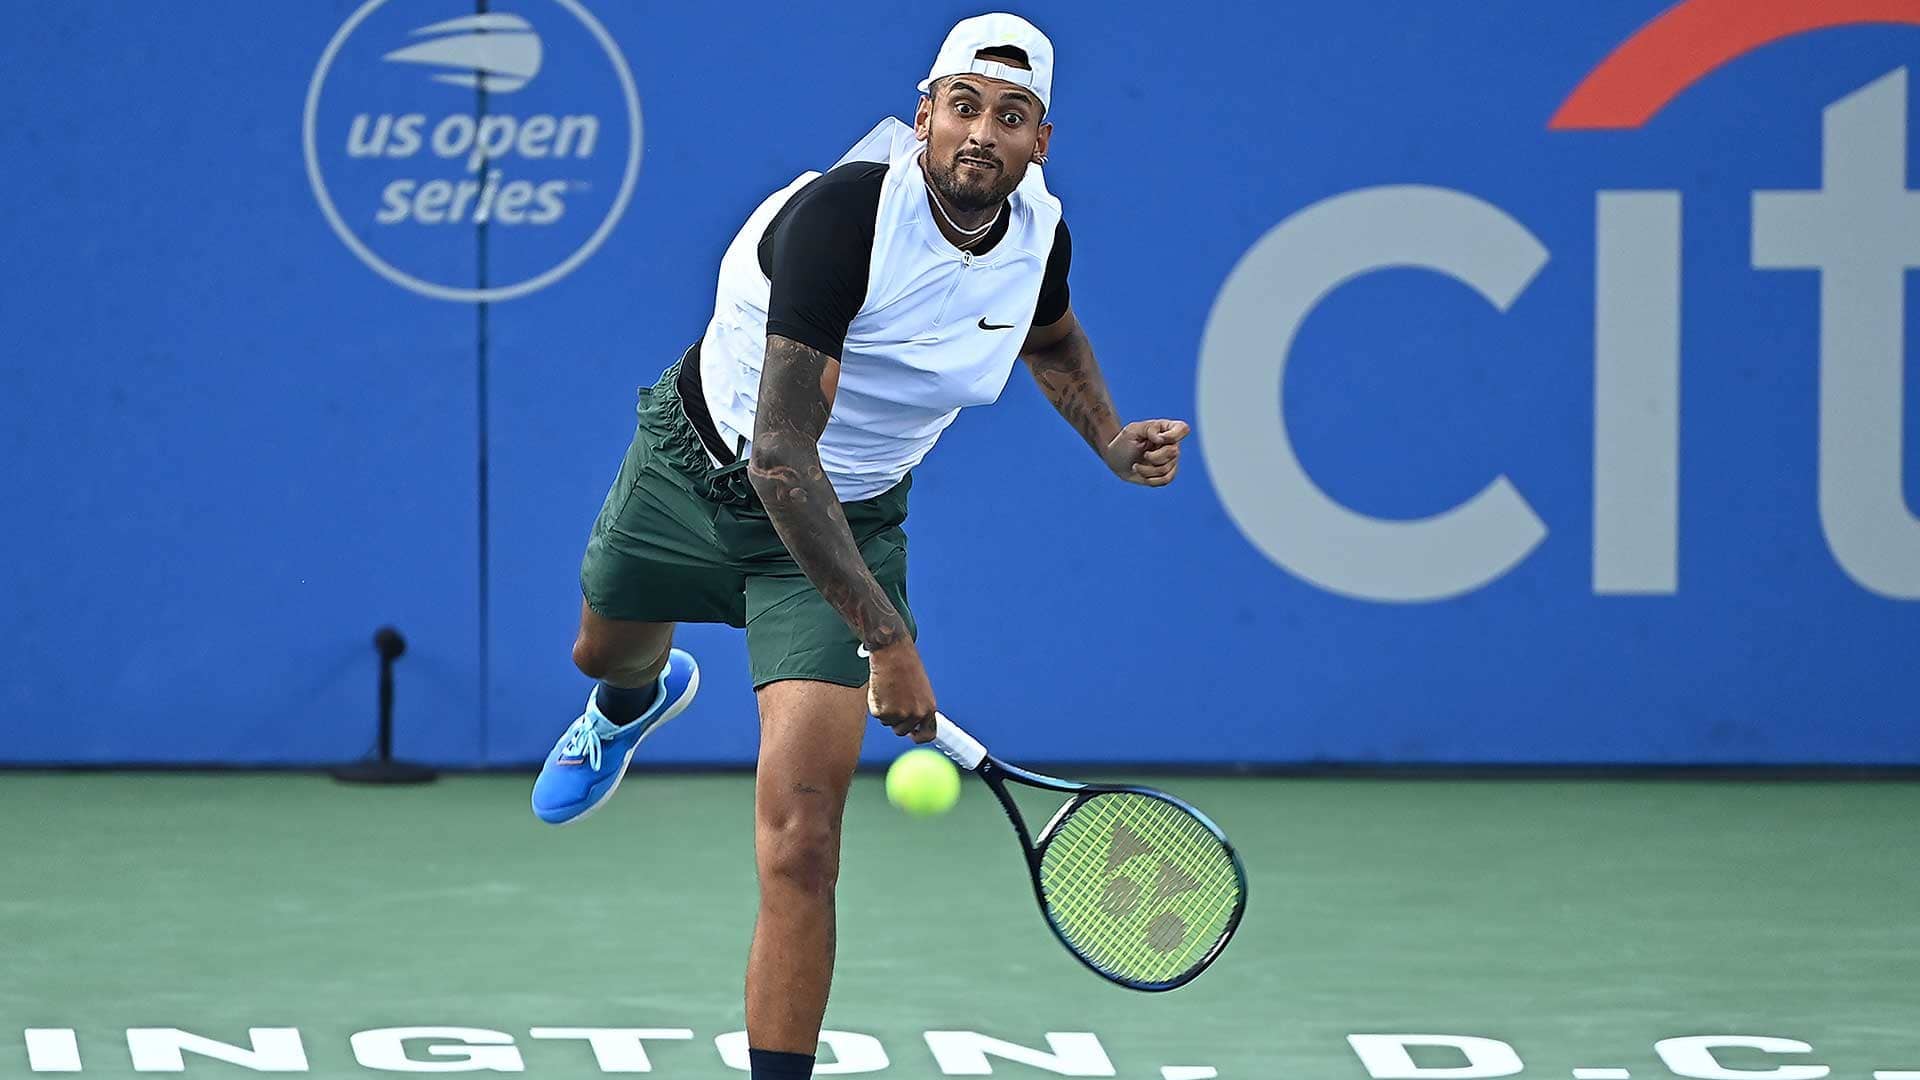 Nick Kyrgios On Fan Serve Tactic I Think Its A Cool Experience For Someone ATP Tour Tennis